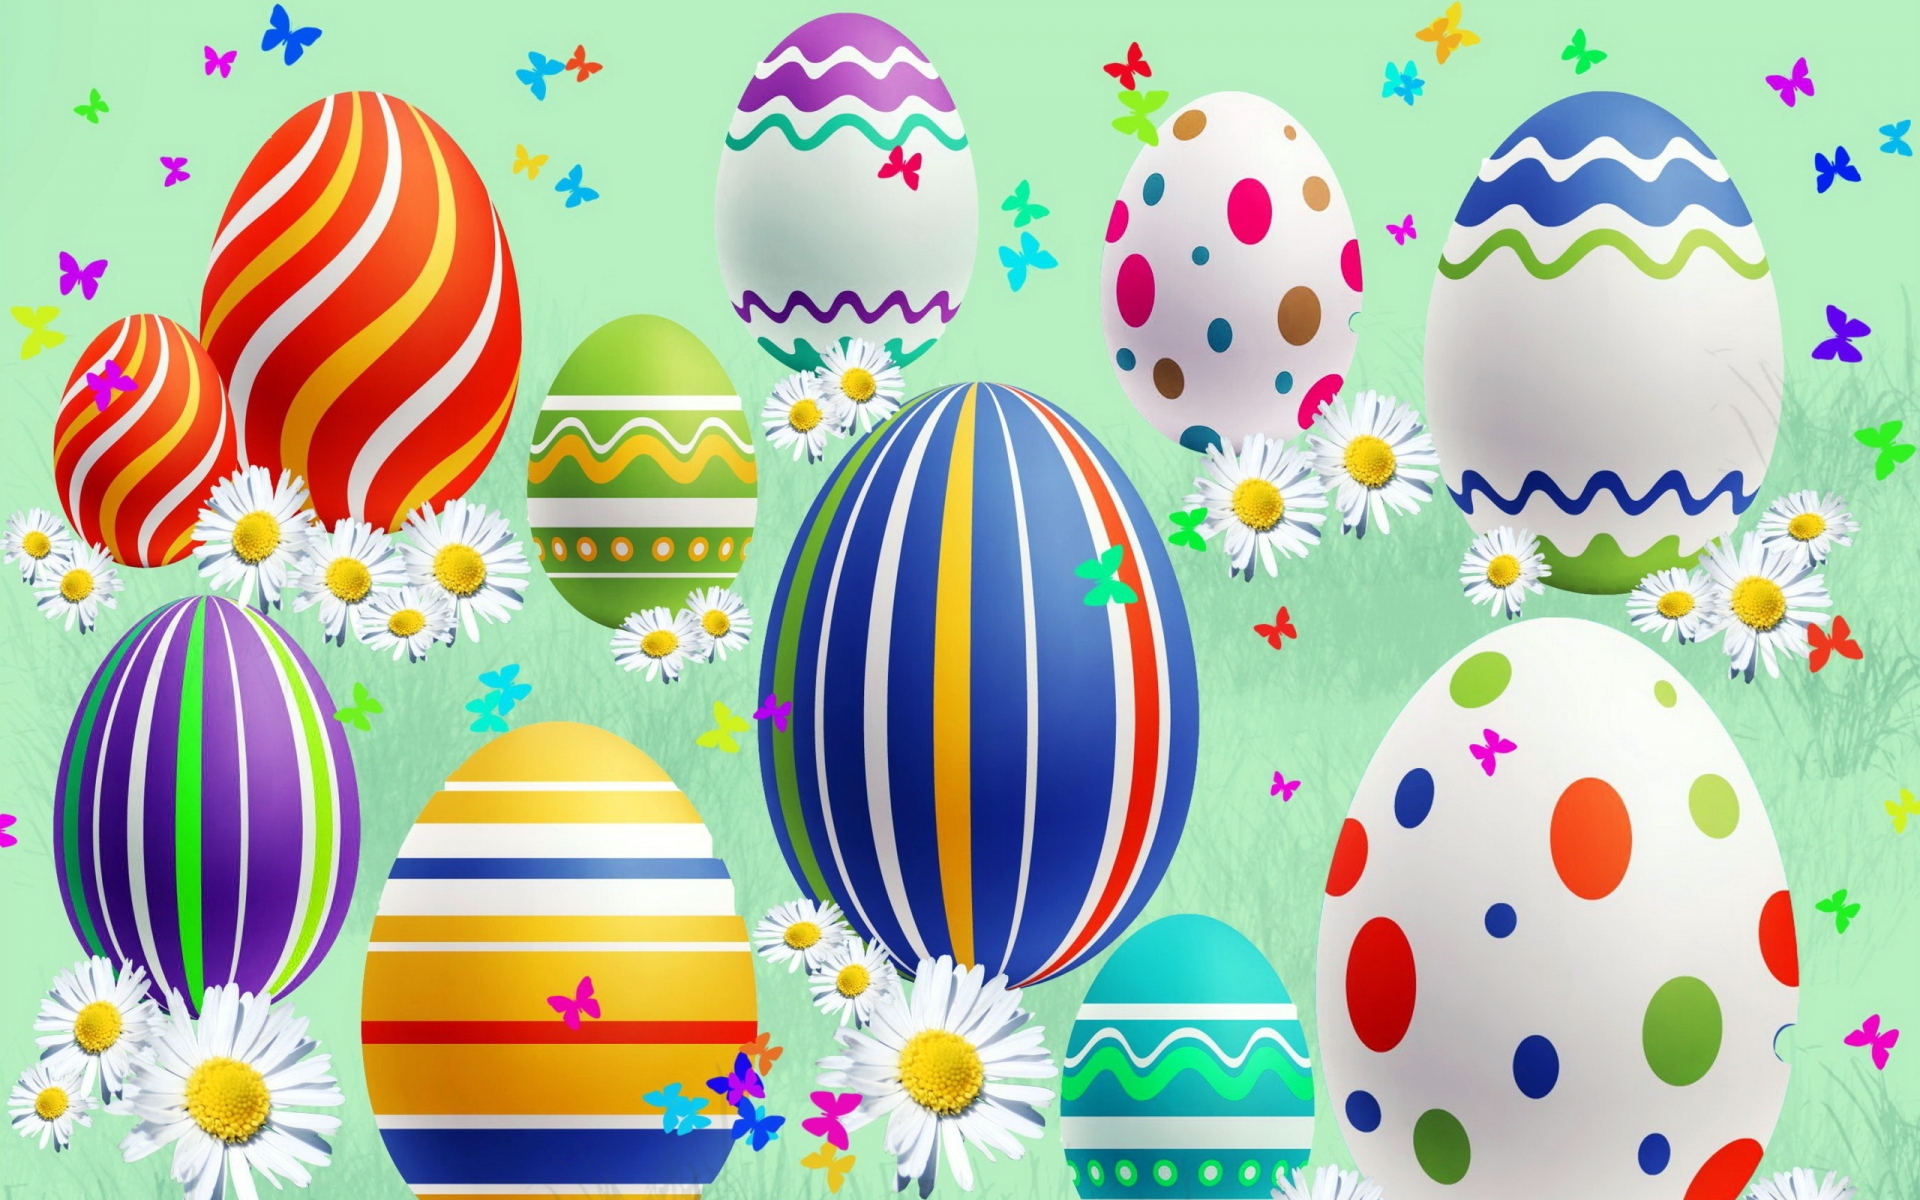 Lovely Easter Eggs for 1920 x 1200 widescreen resolution